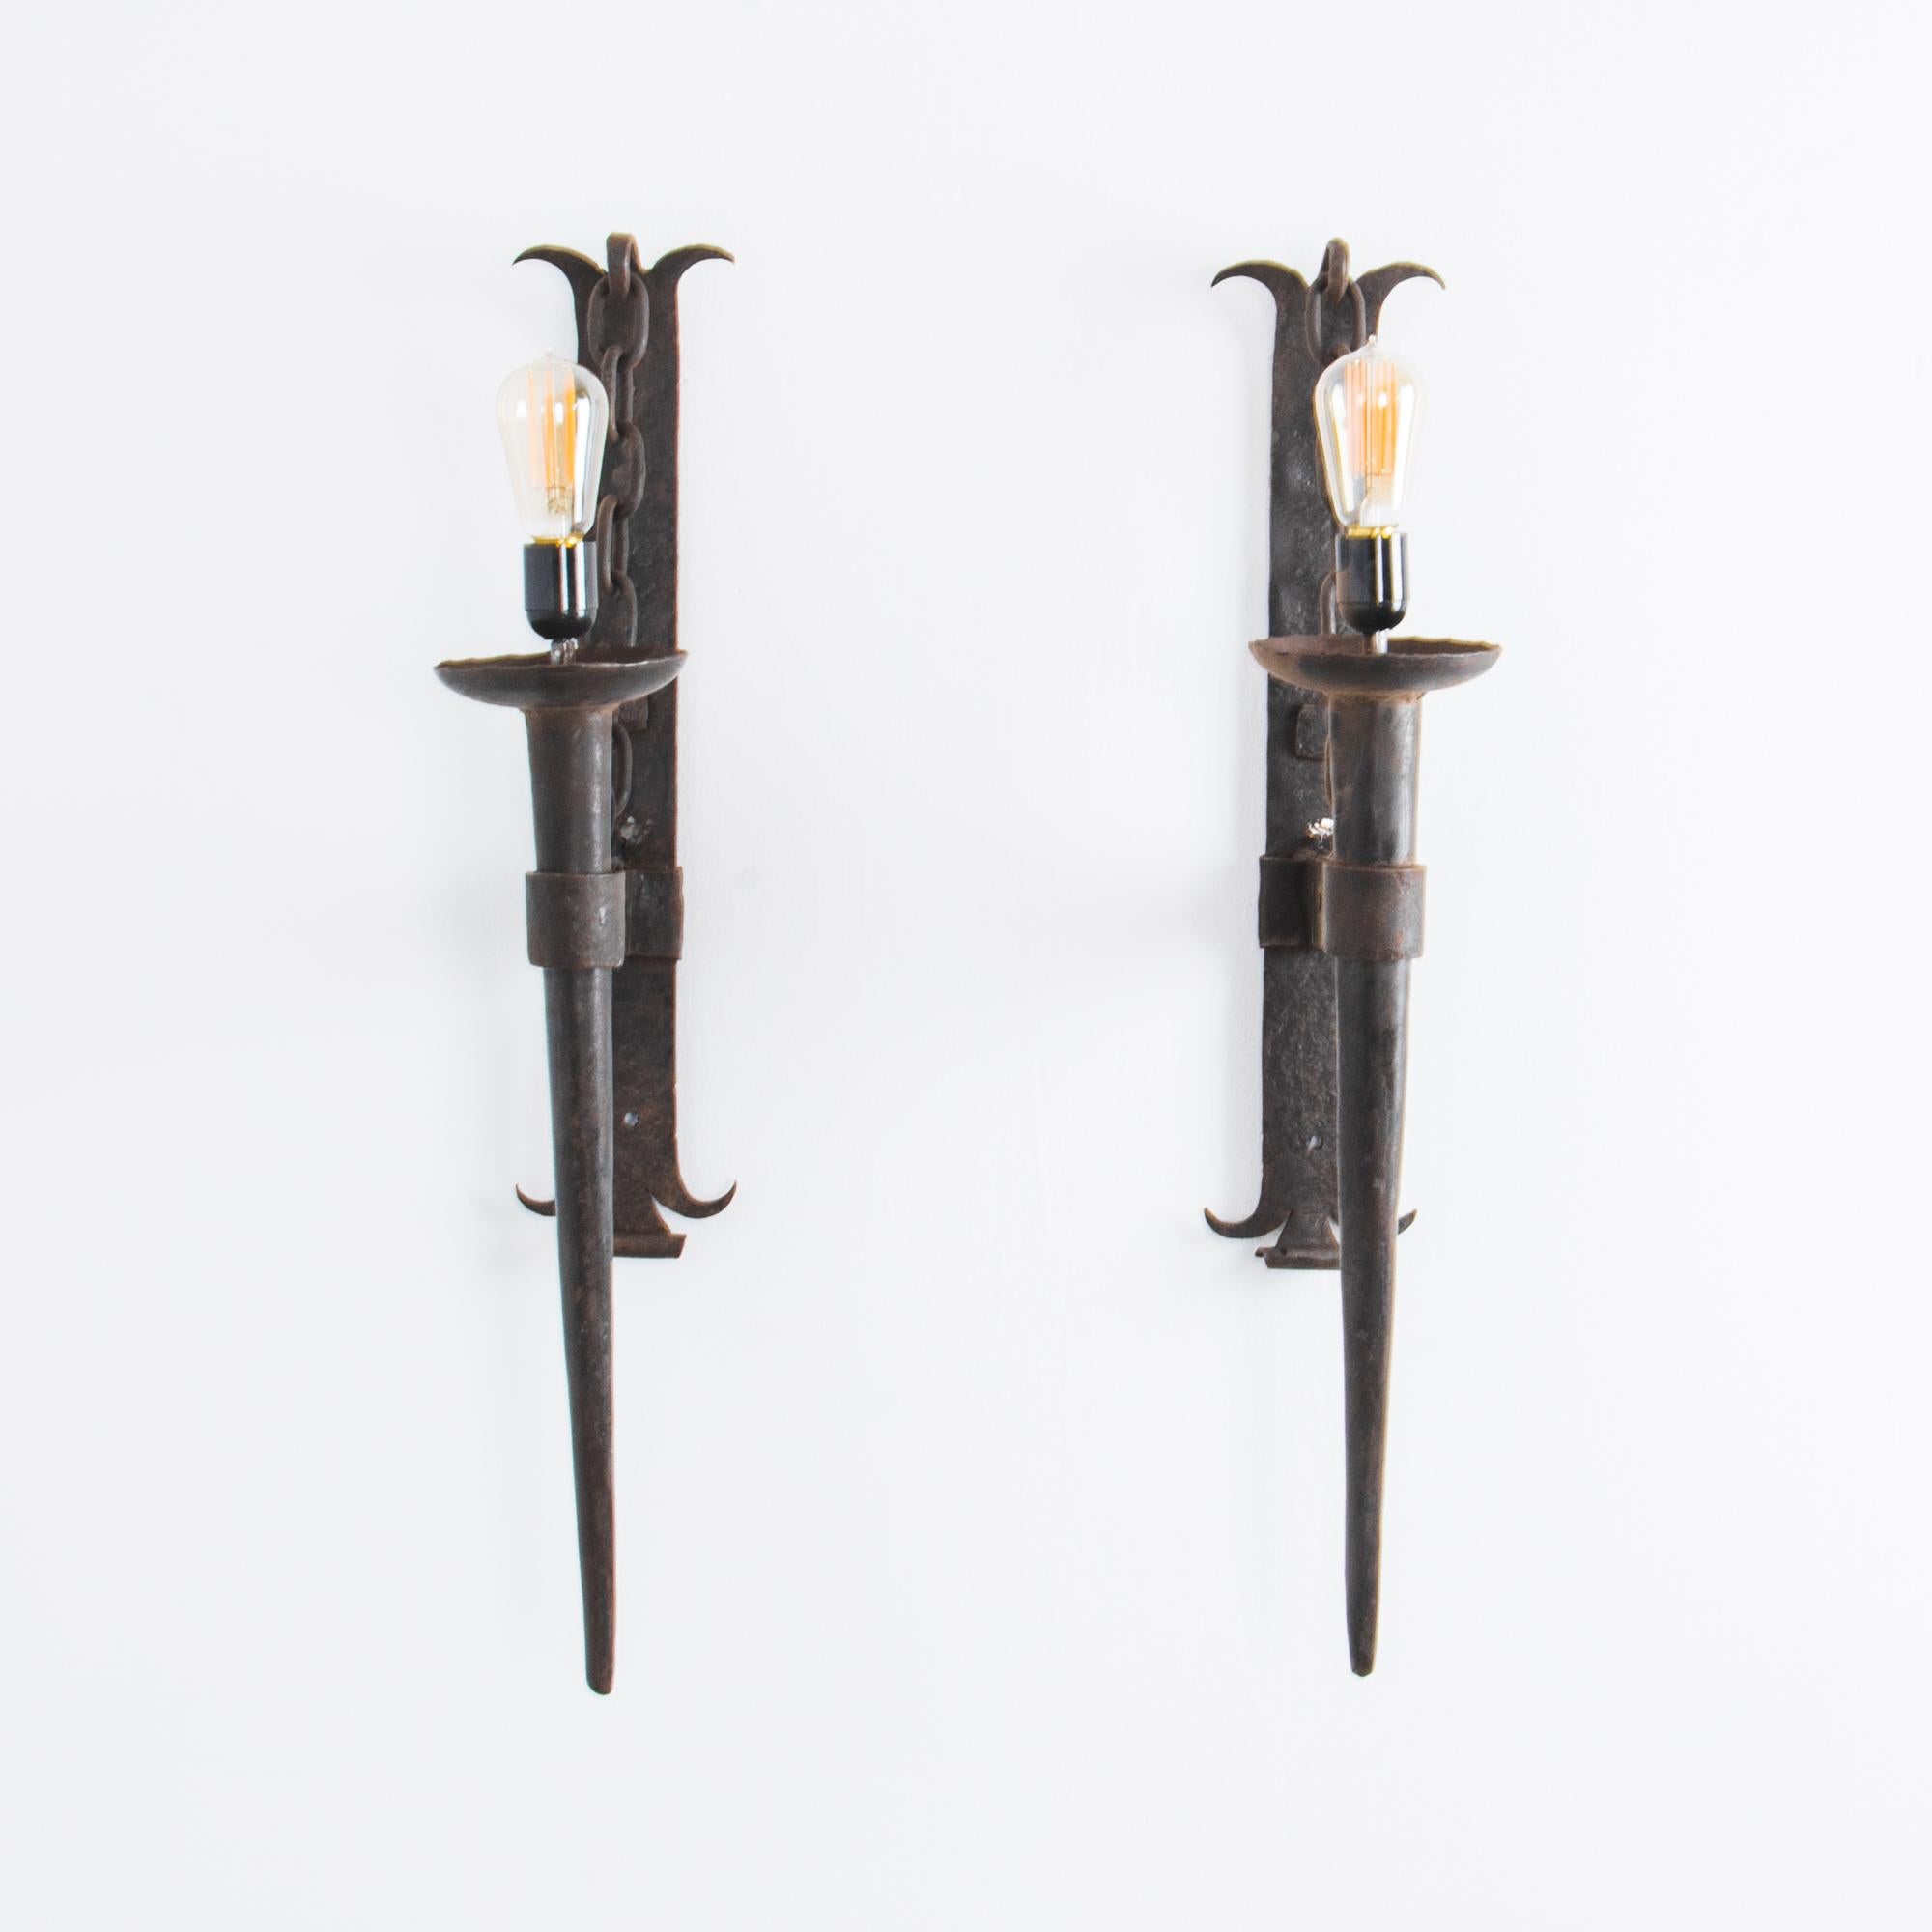 This pair of wall sconces from France, circa 1940, provide a striking light source. Made of wrought iron, their torch-like design gives a medieval gothic effect, accentuated by the chain detail on the wall brackets. Fully wired for use, these wall